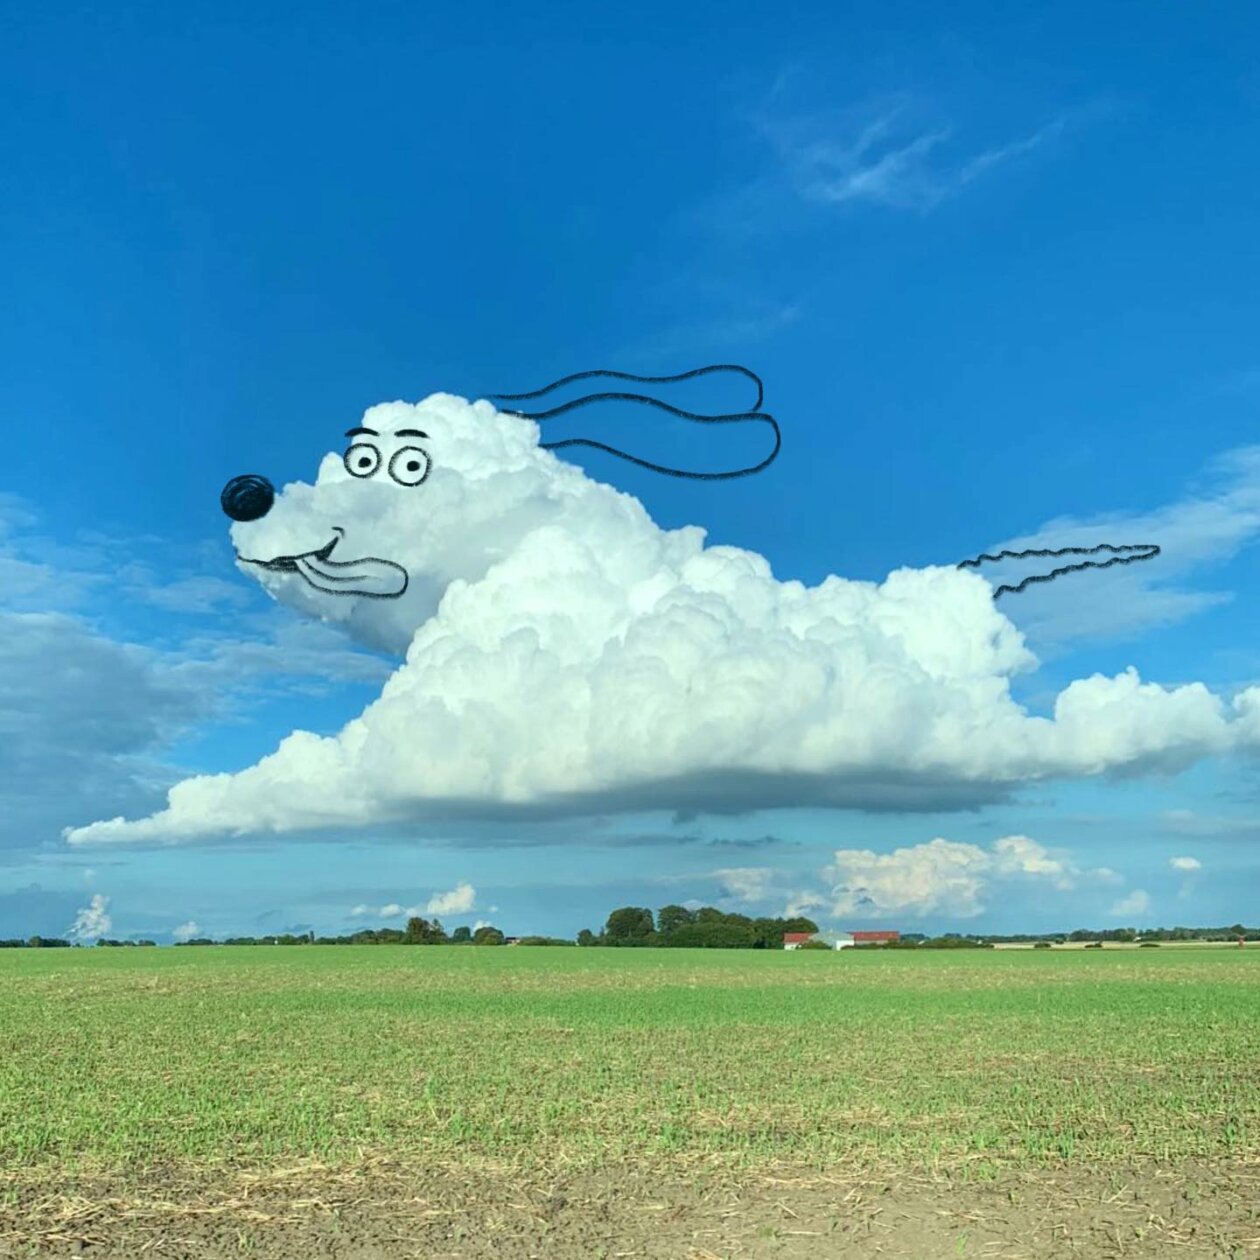 Clouds turned into amusing characters by Chris Judge